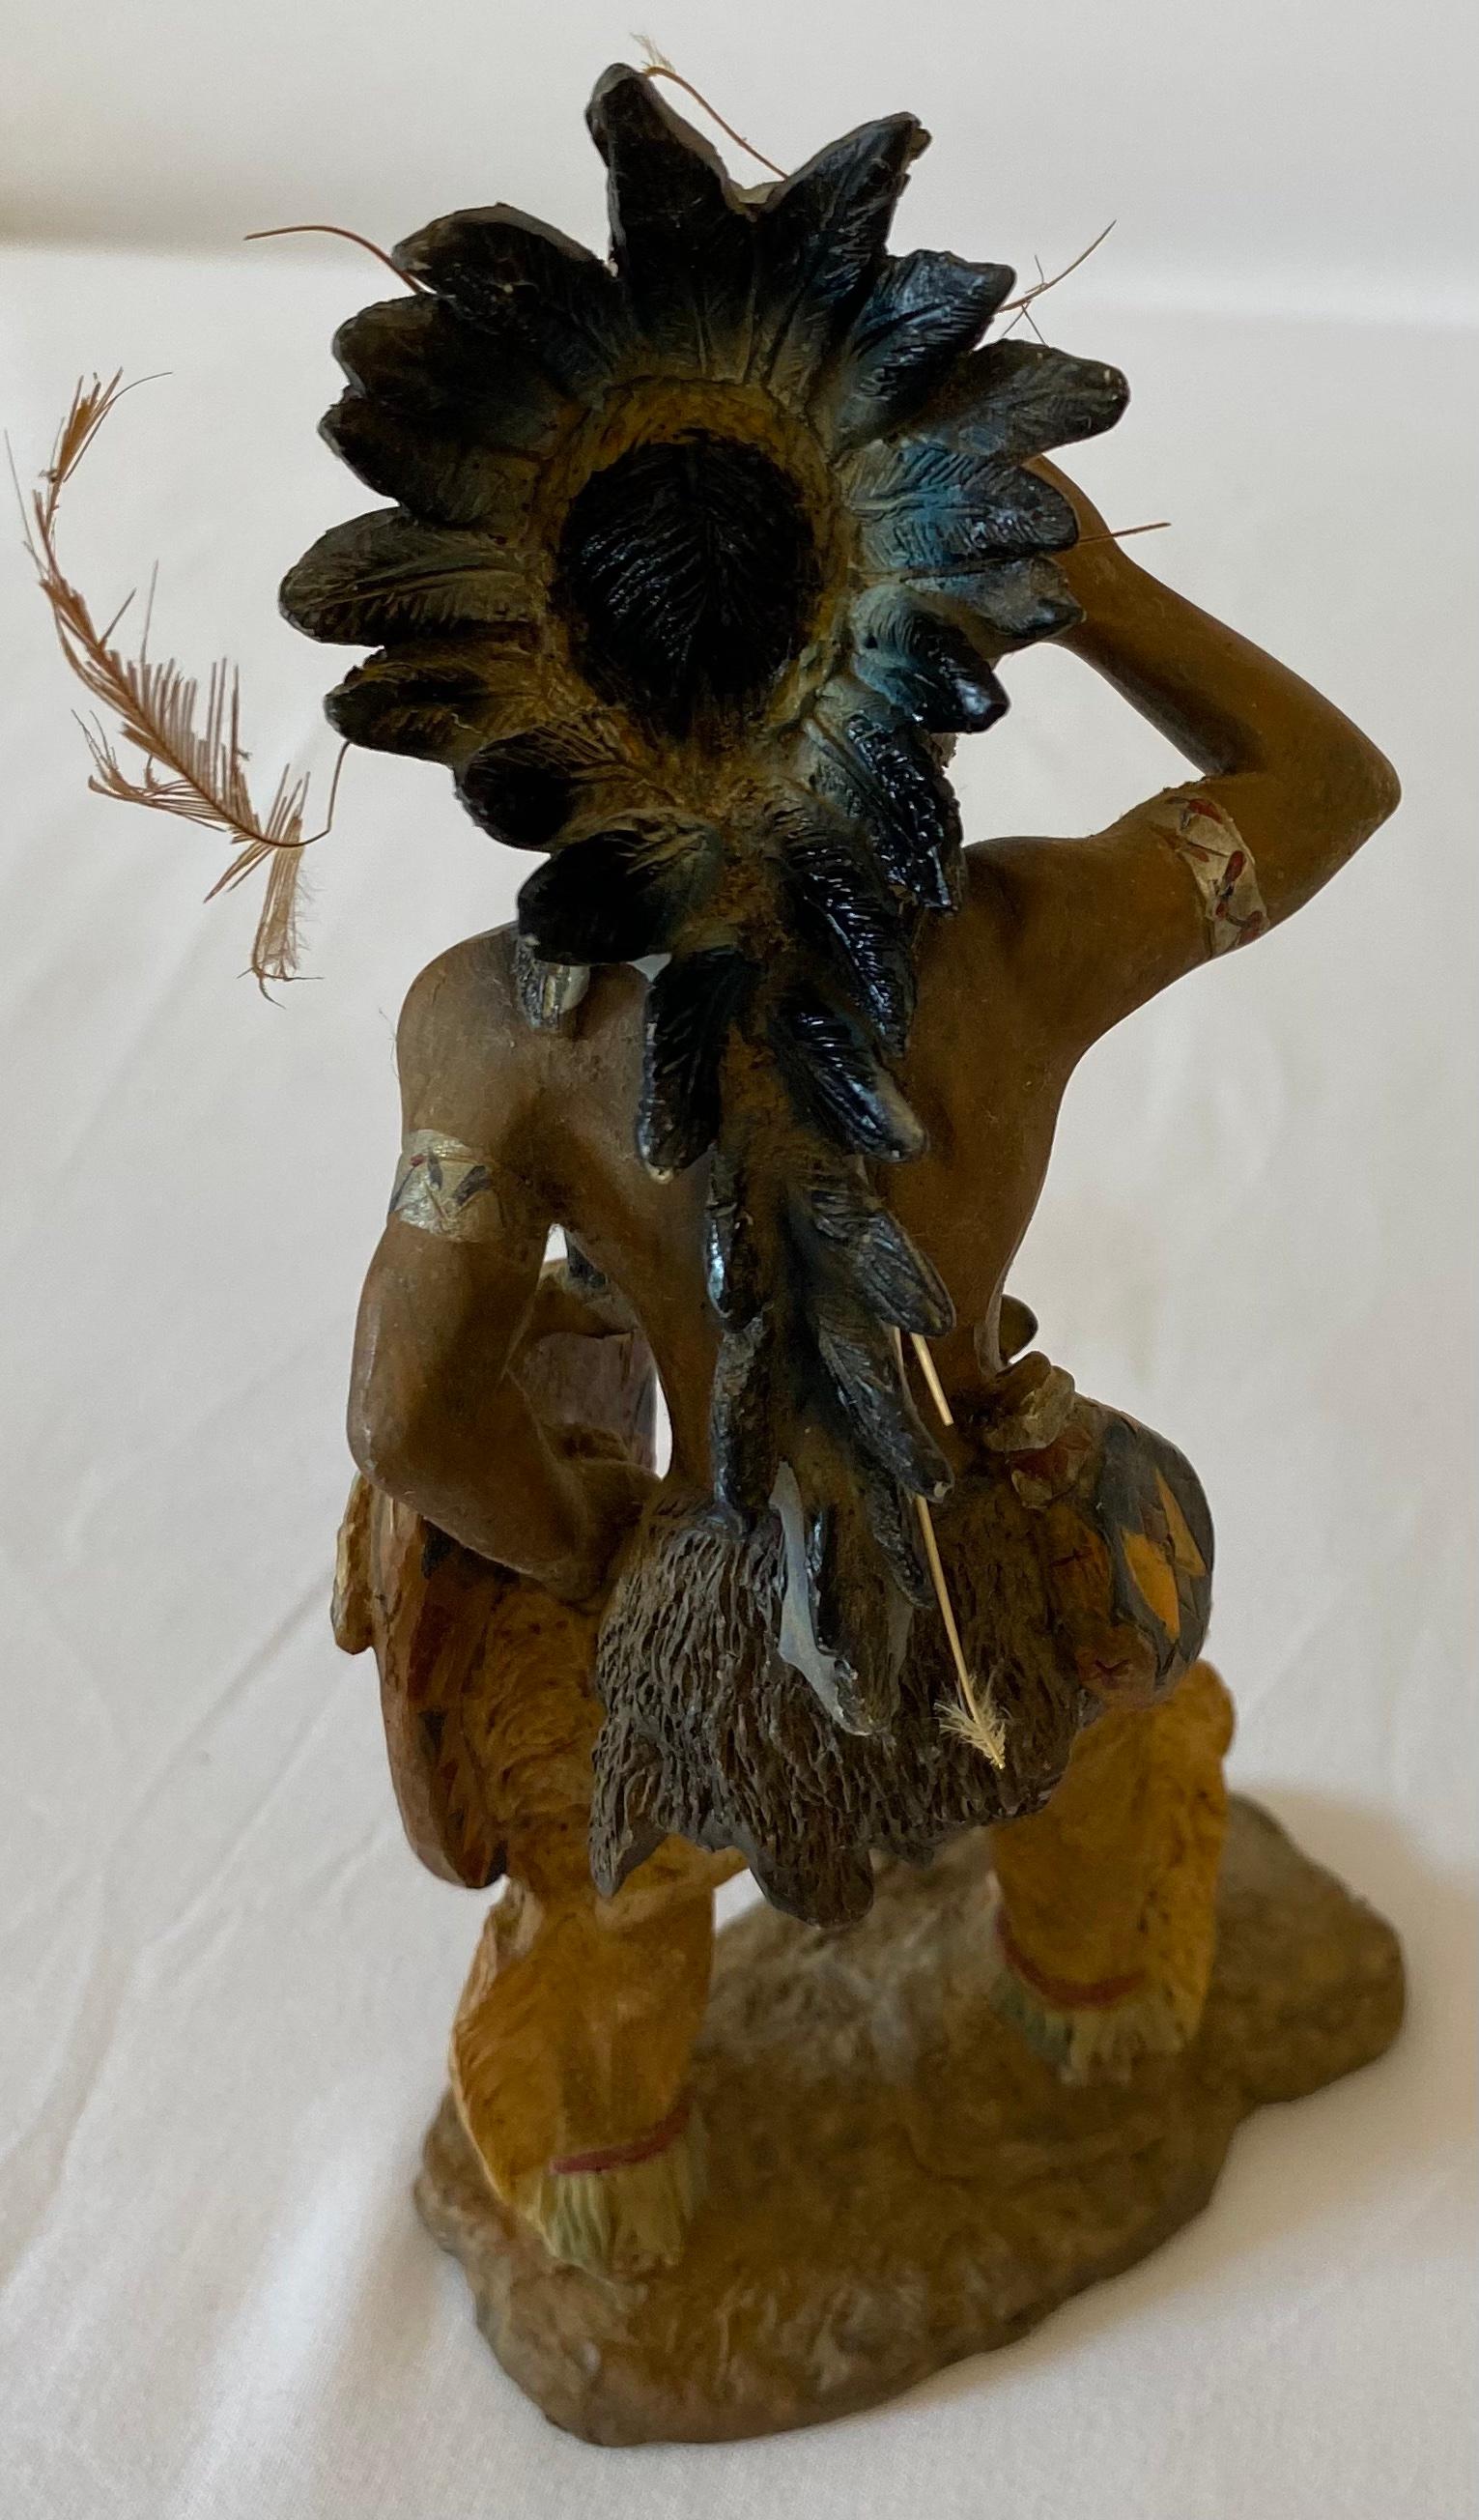 Artfully crafted and attributed to Universal Statuary Corp. this collectible Native American Indian statue will look great in any western setting or as an educational tool.

Although this items shows age appropriate wear, it has striking